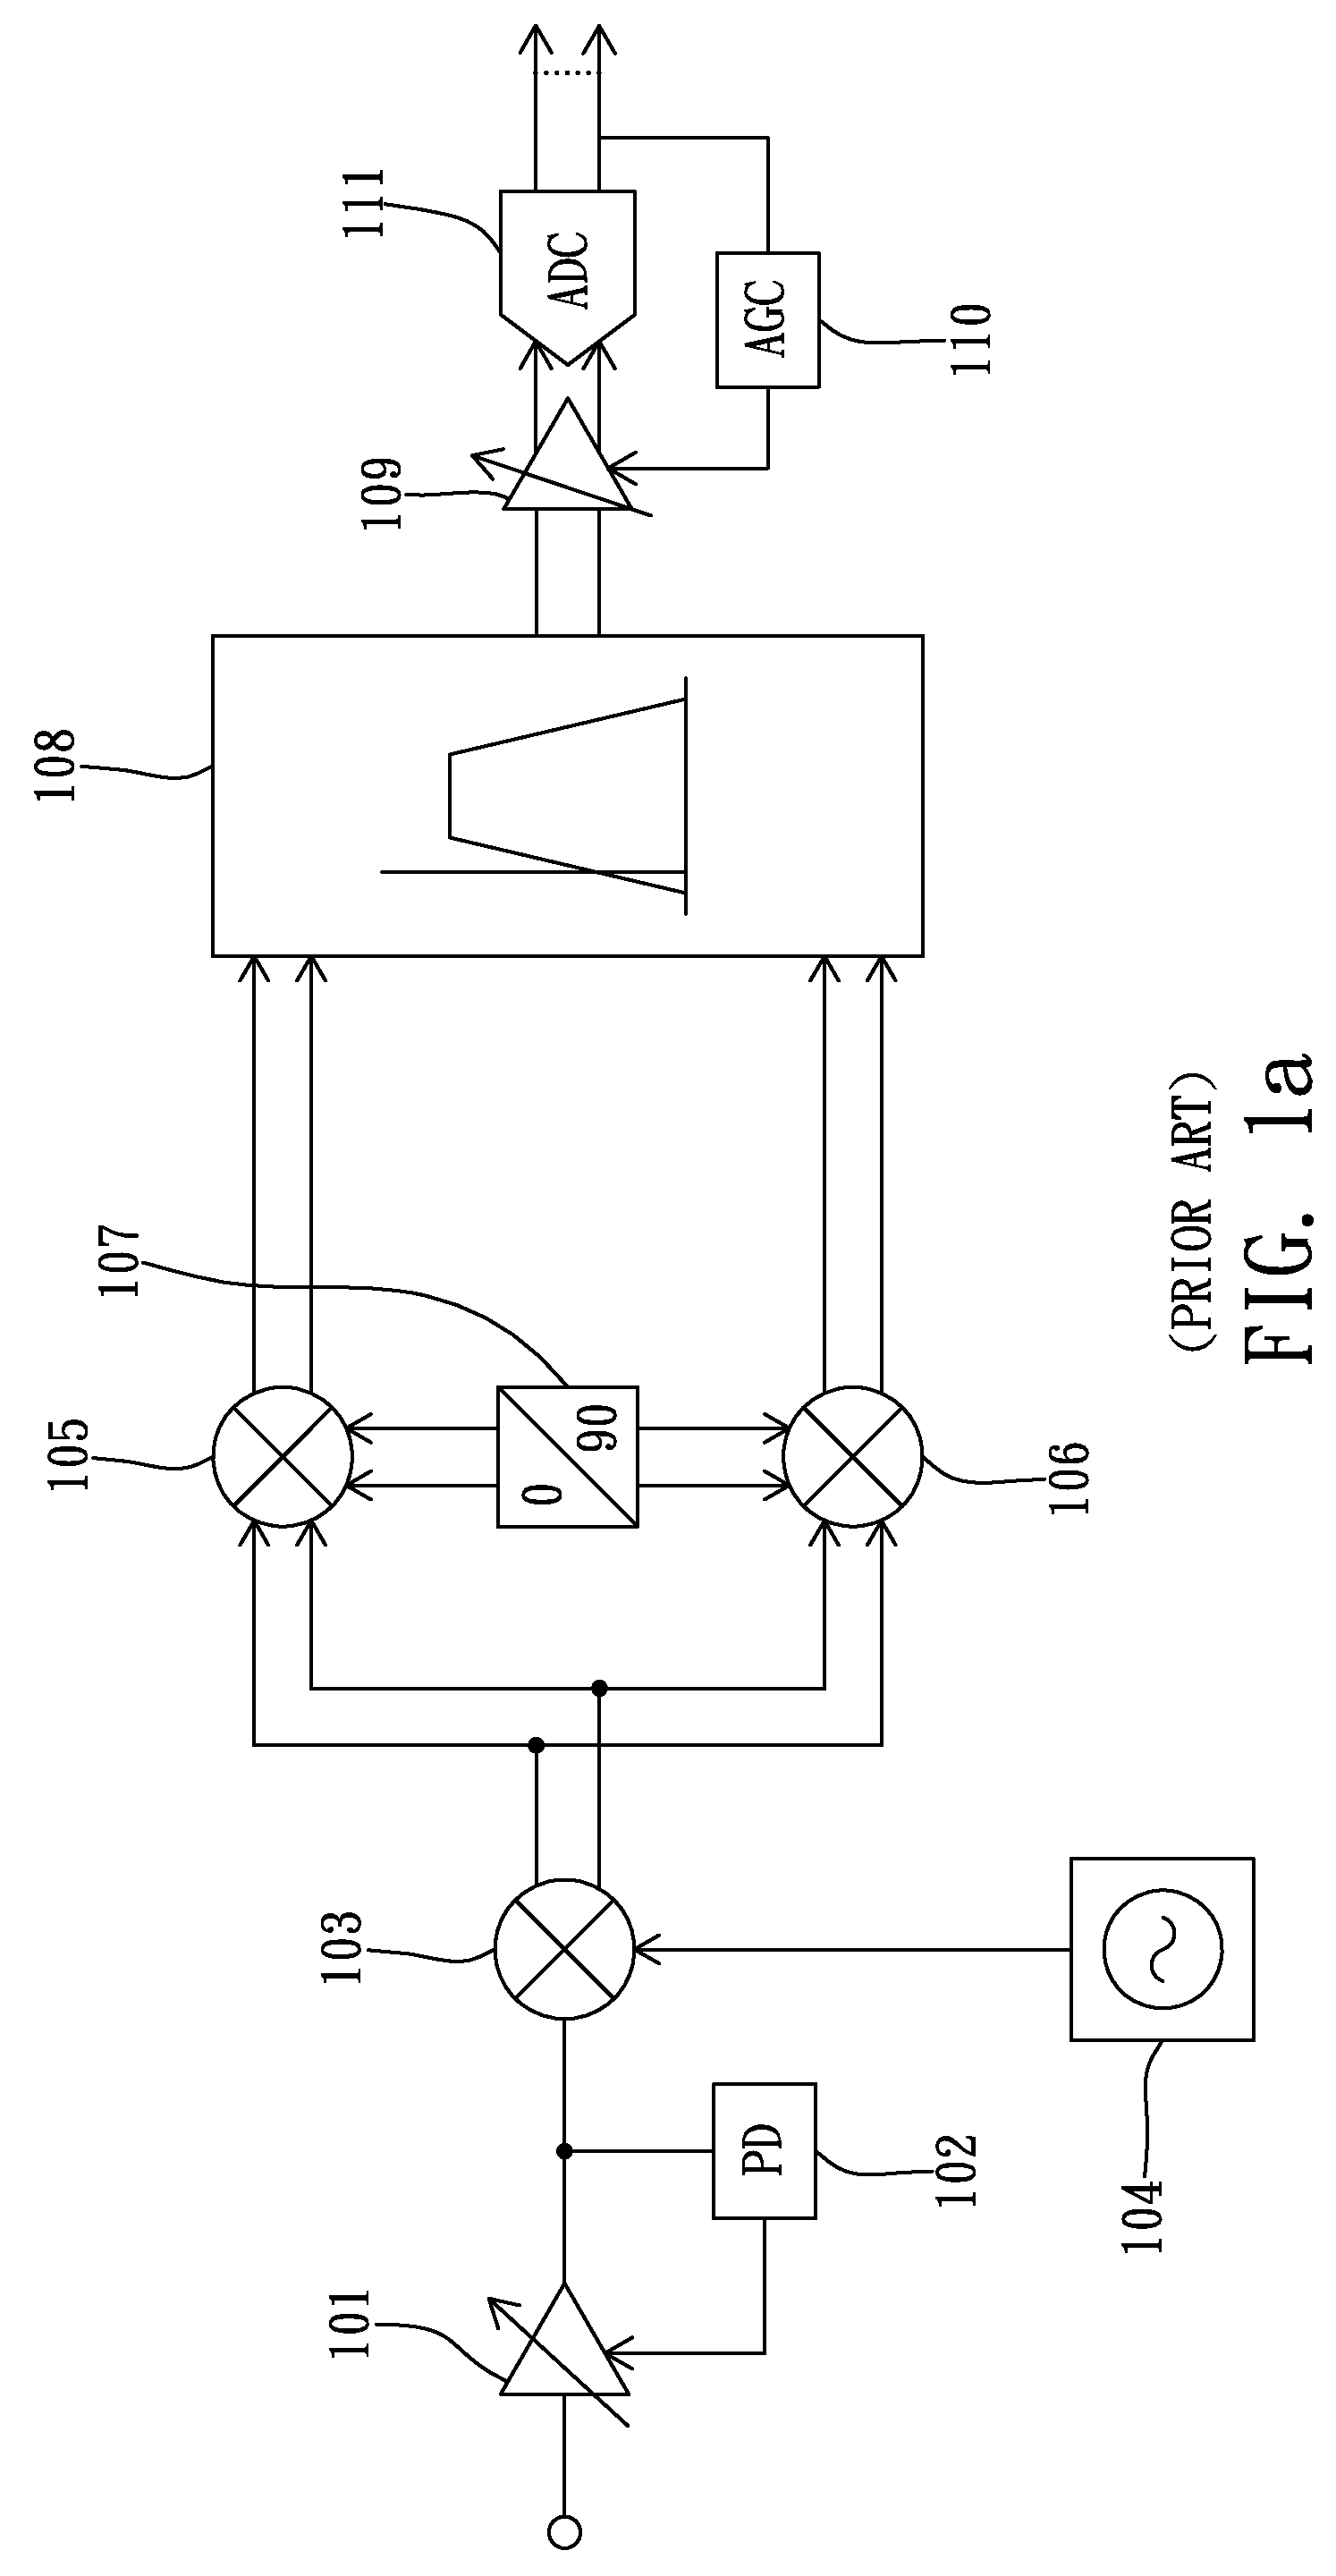 Interference cancellation circuit for a receiver